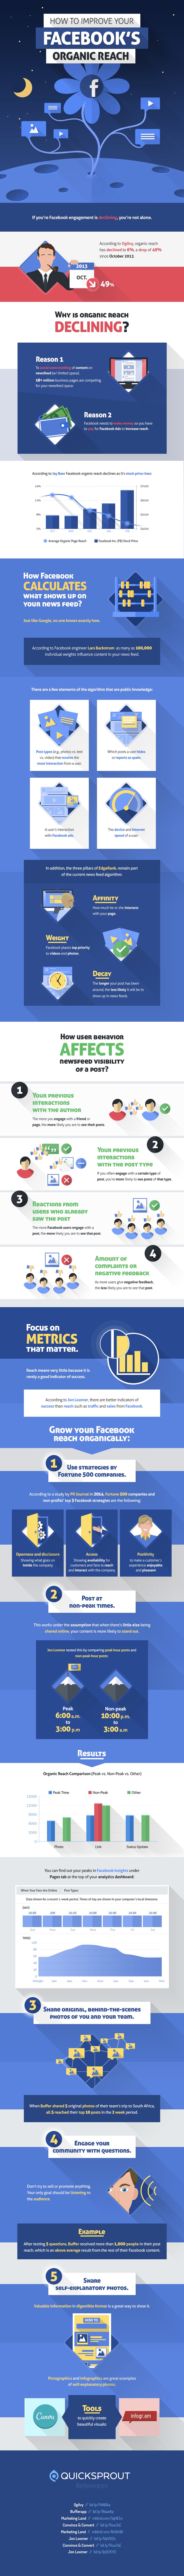 Infographic: How to Improve Organic Reach on Facebook